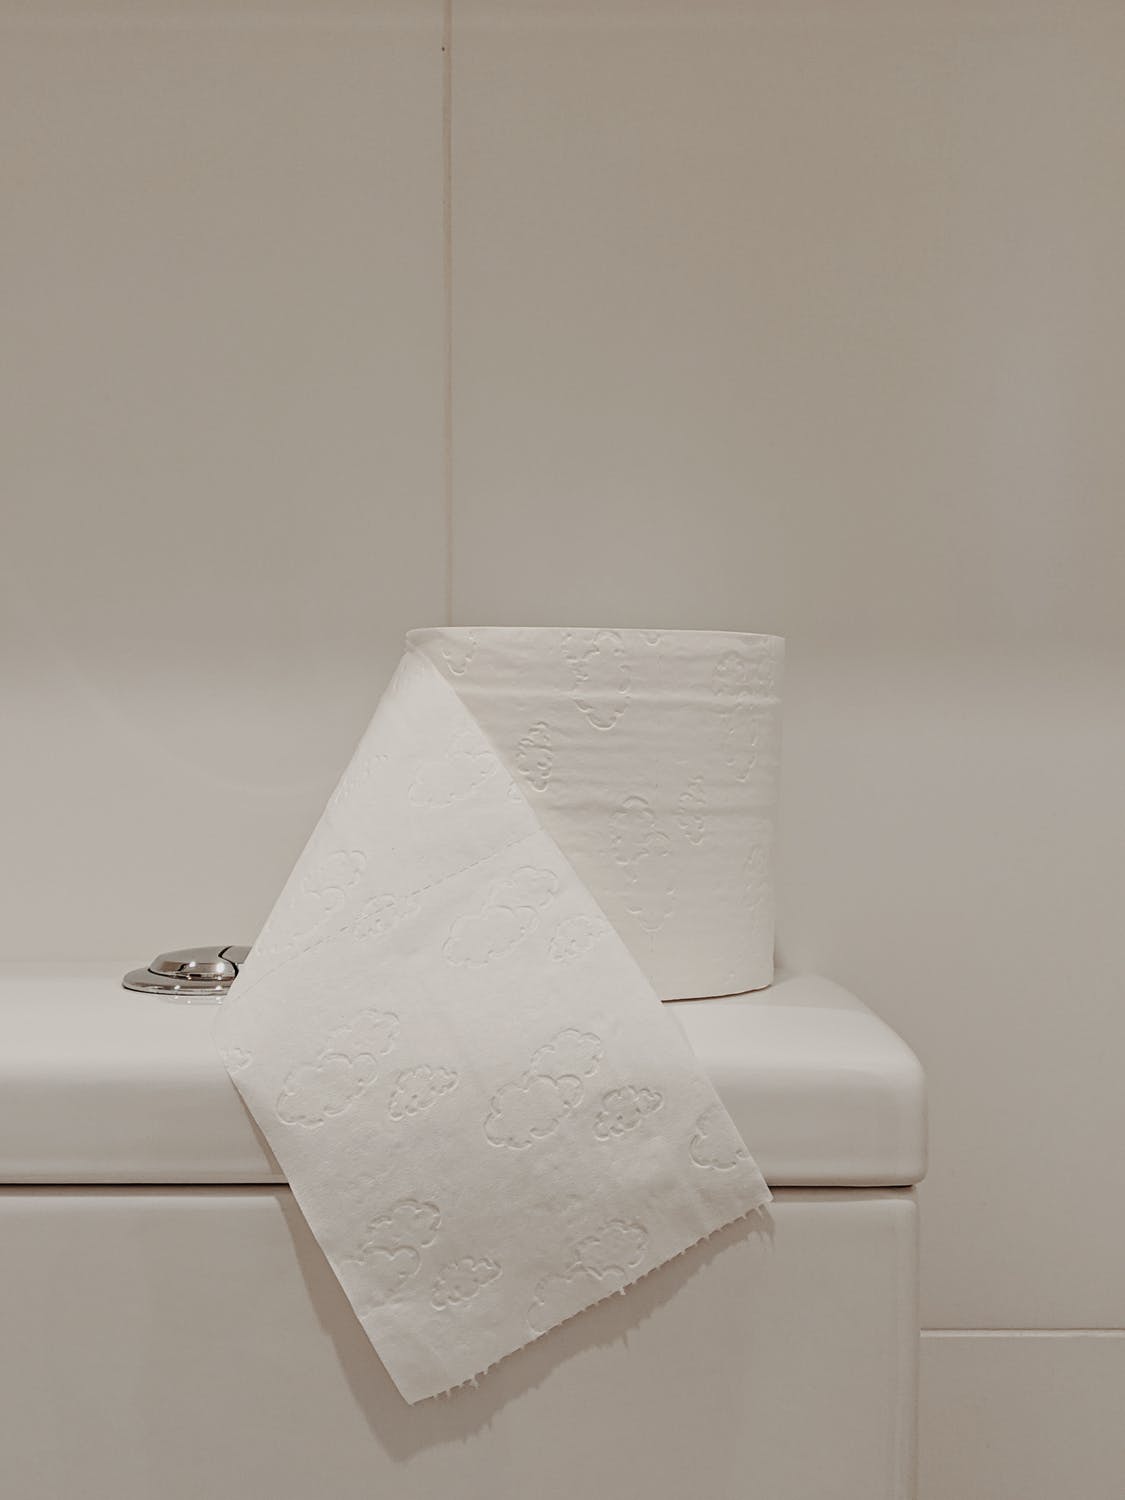 Bumroll is Earth Friendly Premium Toilet Paper – Join Bumroll